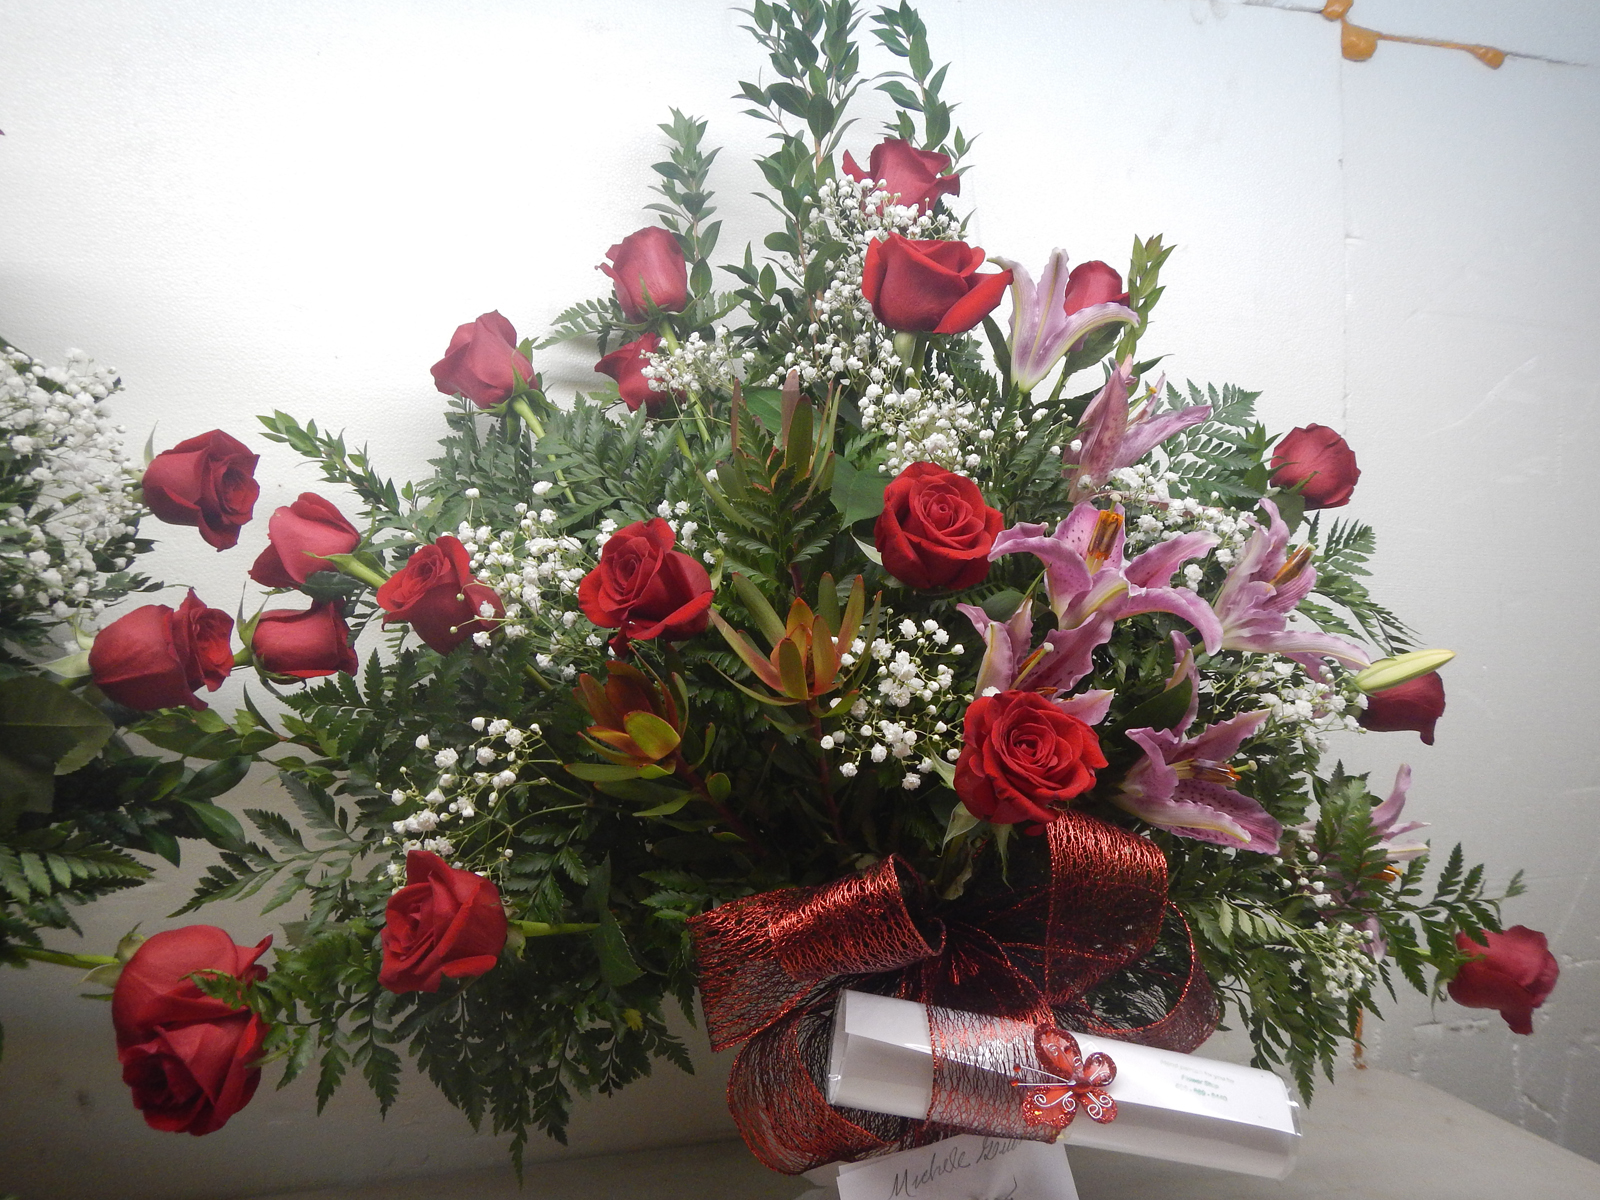 Medium rose and lily bouquet